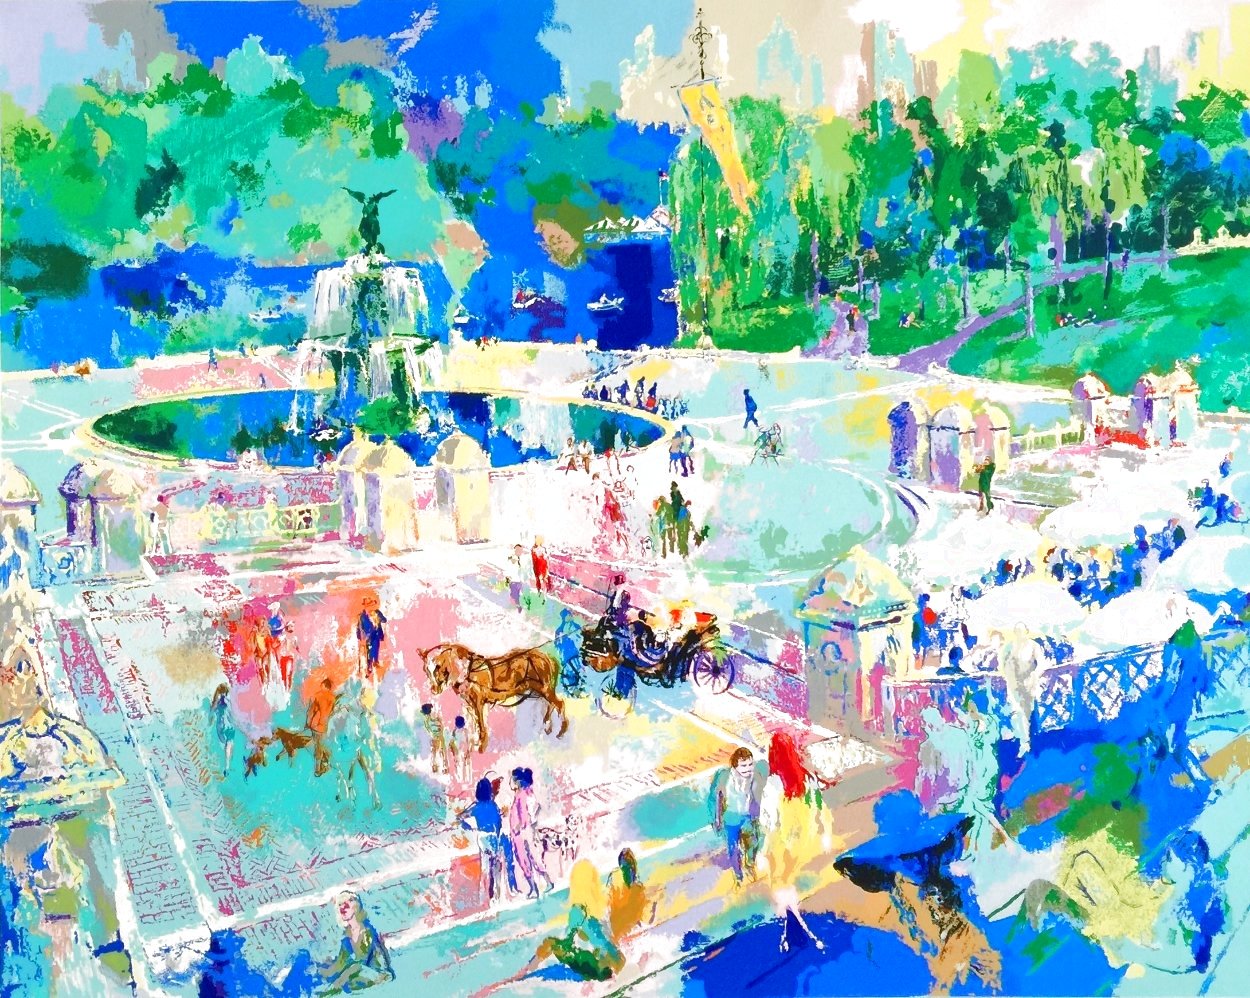 Bethesda Fountain - Central Park PP 1989 - Huge Limited Edition Print by LeRoy Neiman